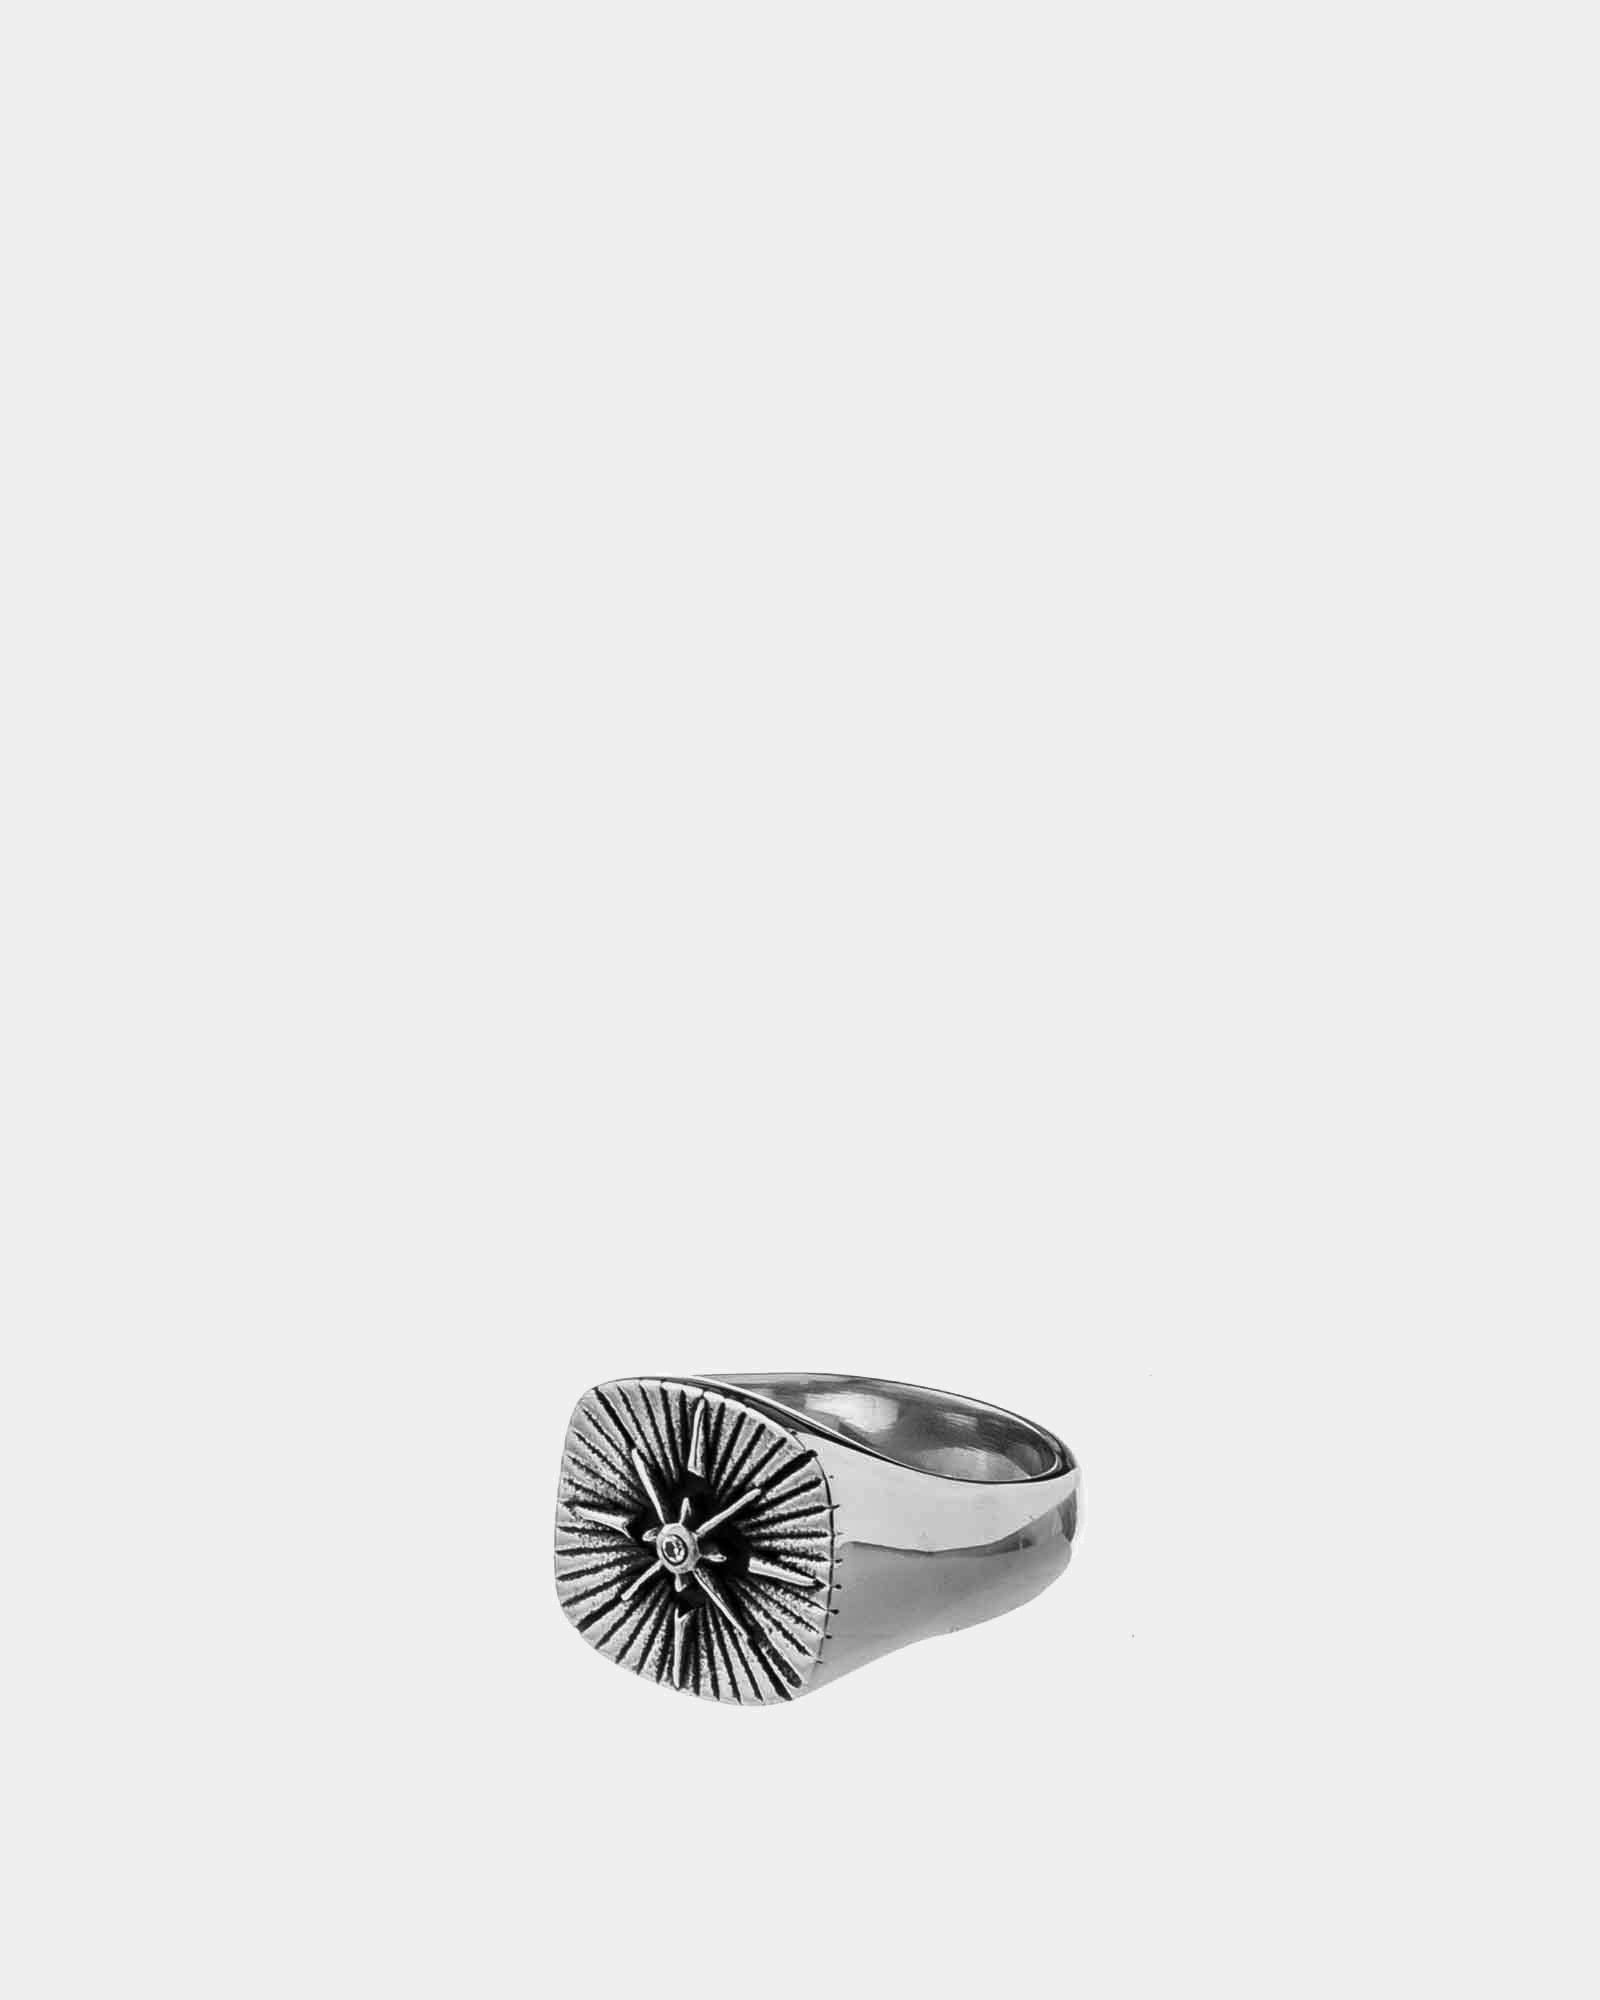 Compass - Stainless Steel Ring - Online Jewelry - Dicci